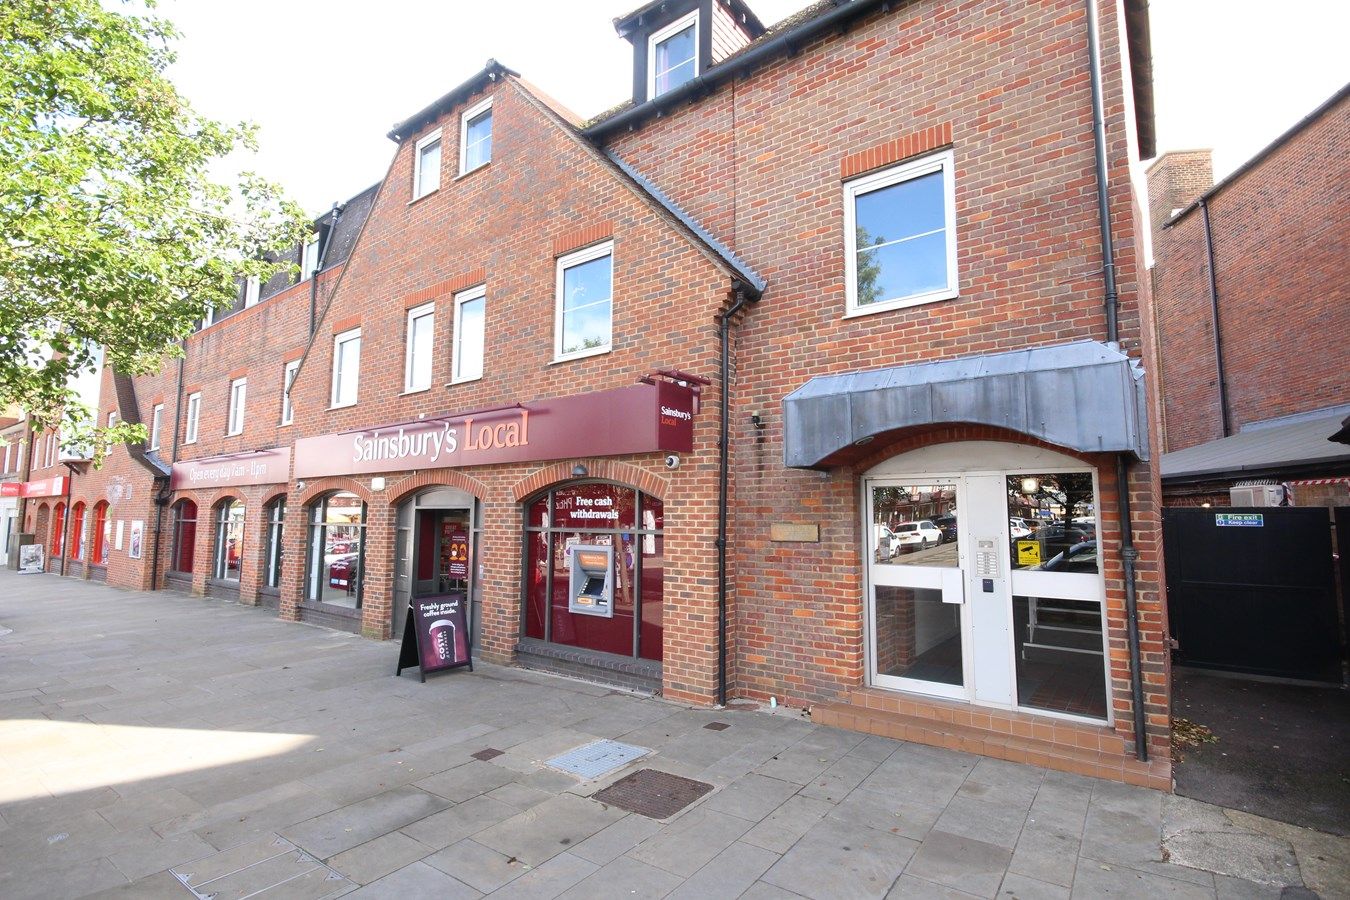 2 Bed Flat For Sale In Palace Court Eastcheap Letchworth Garden City Sg6 - Zoopla